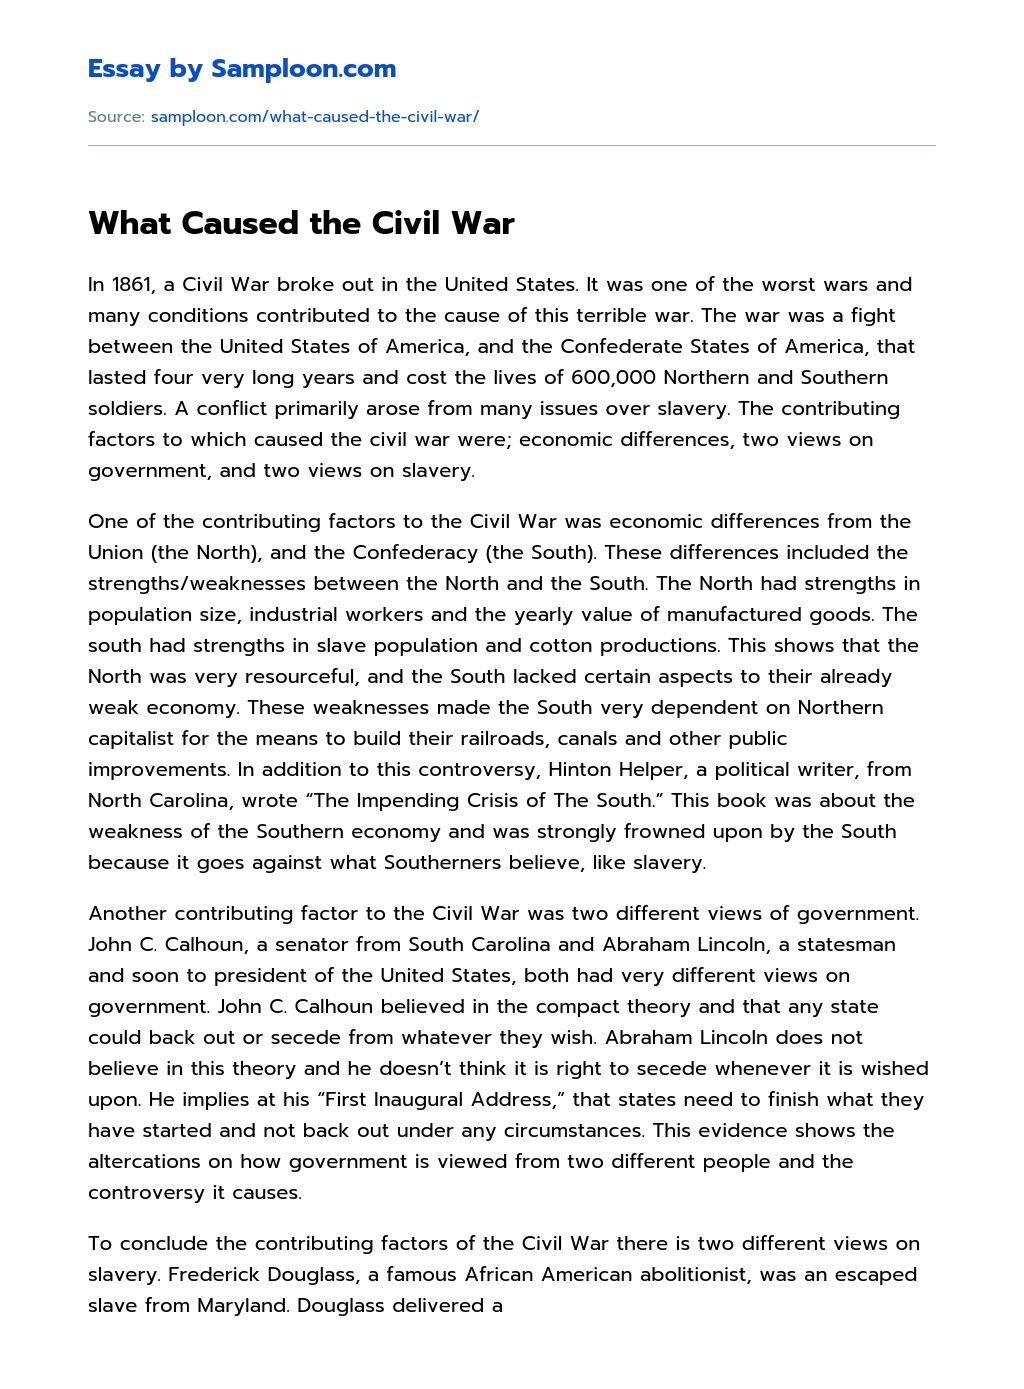 What Caused the Civil War essay